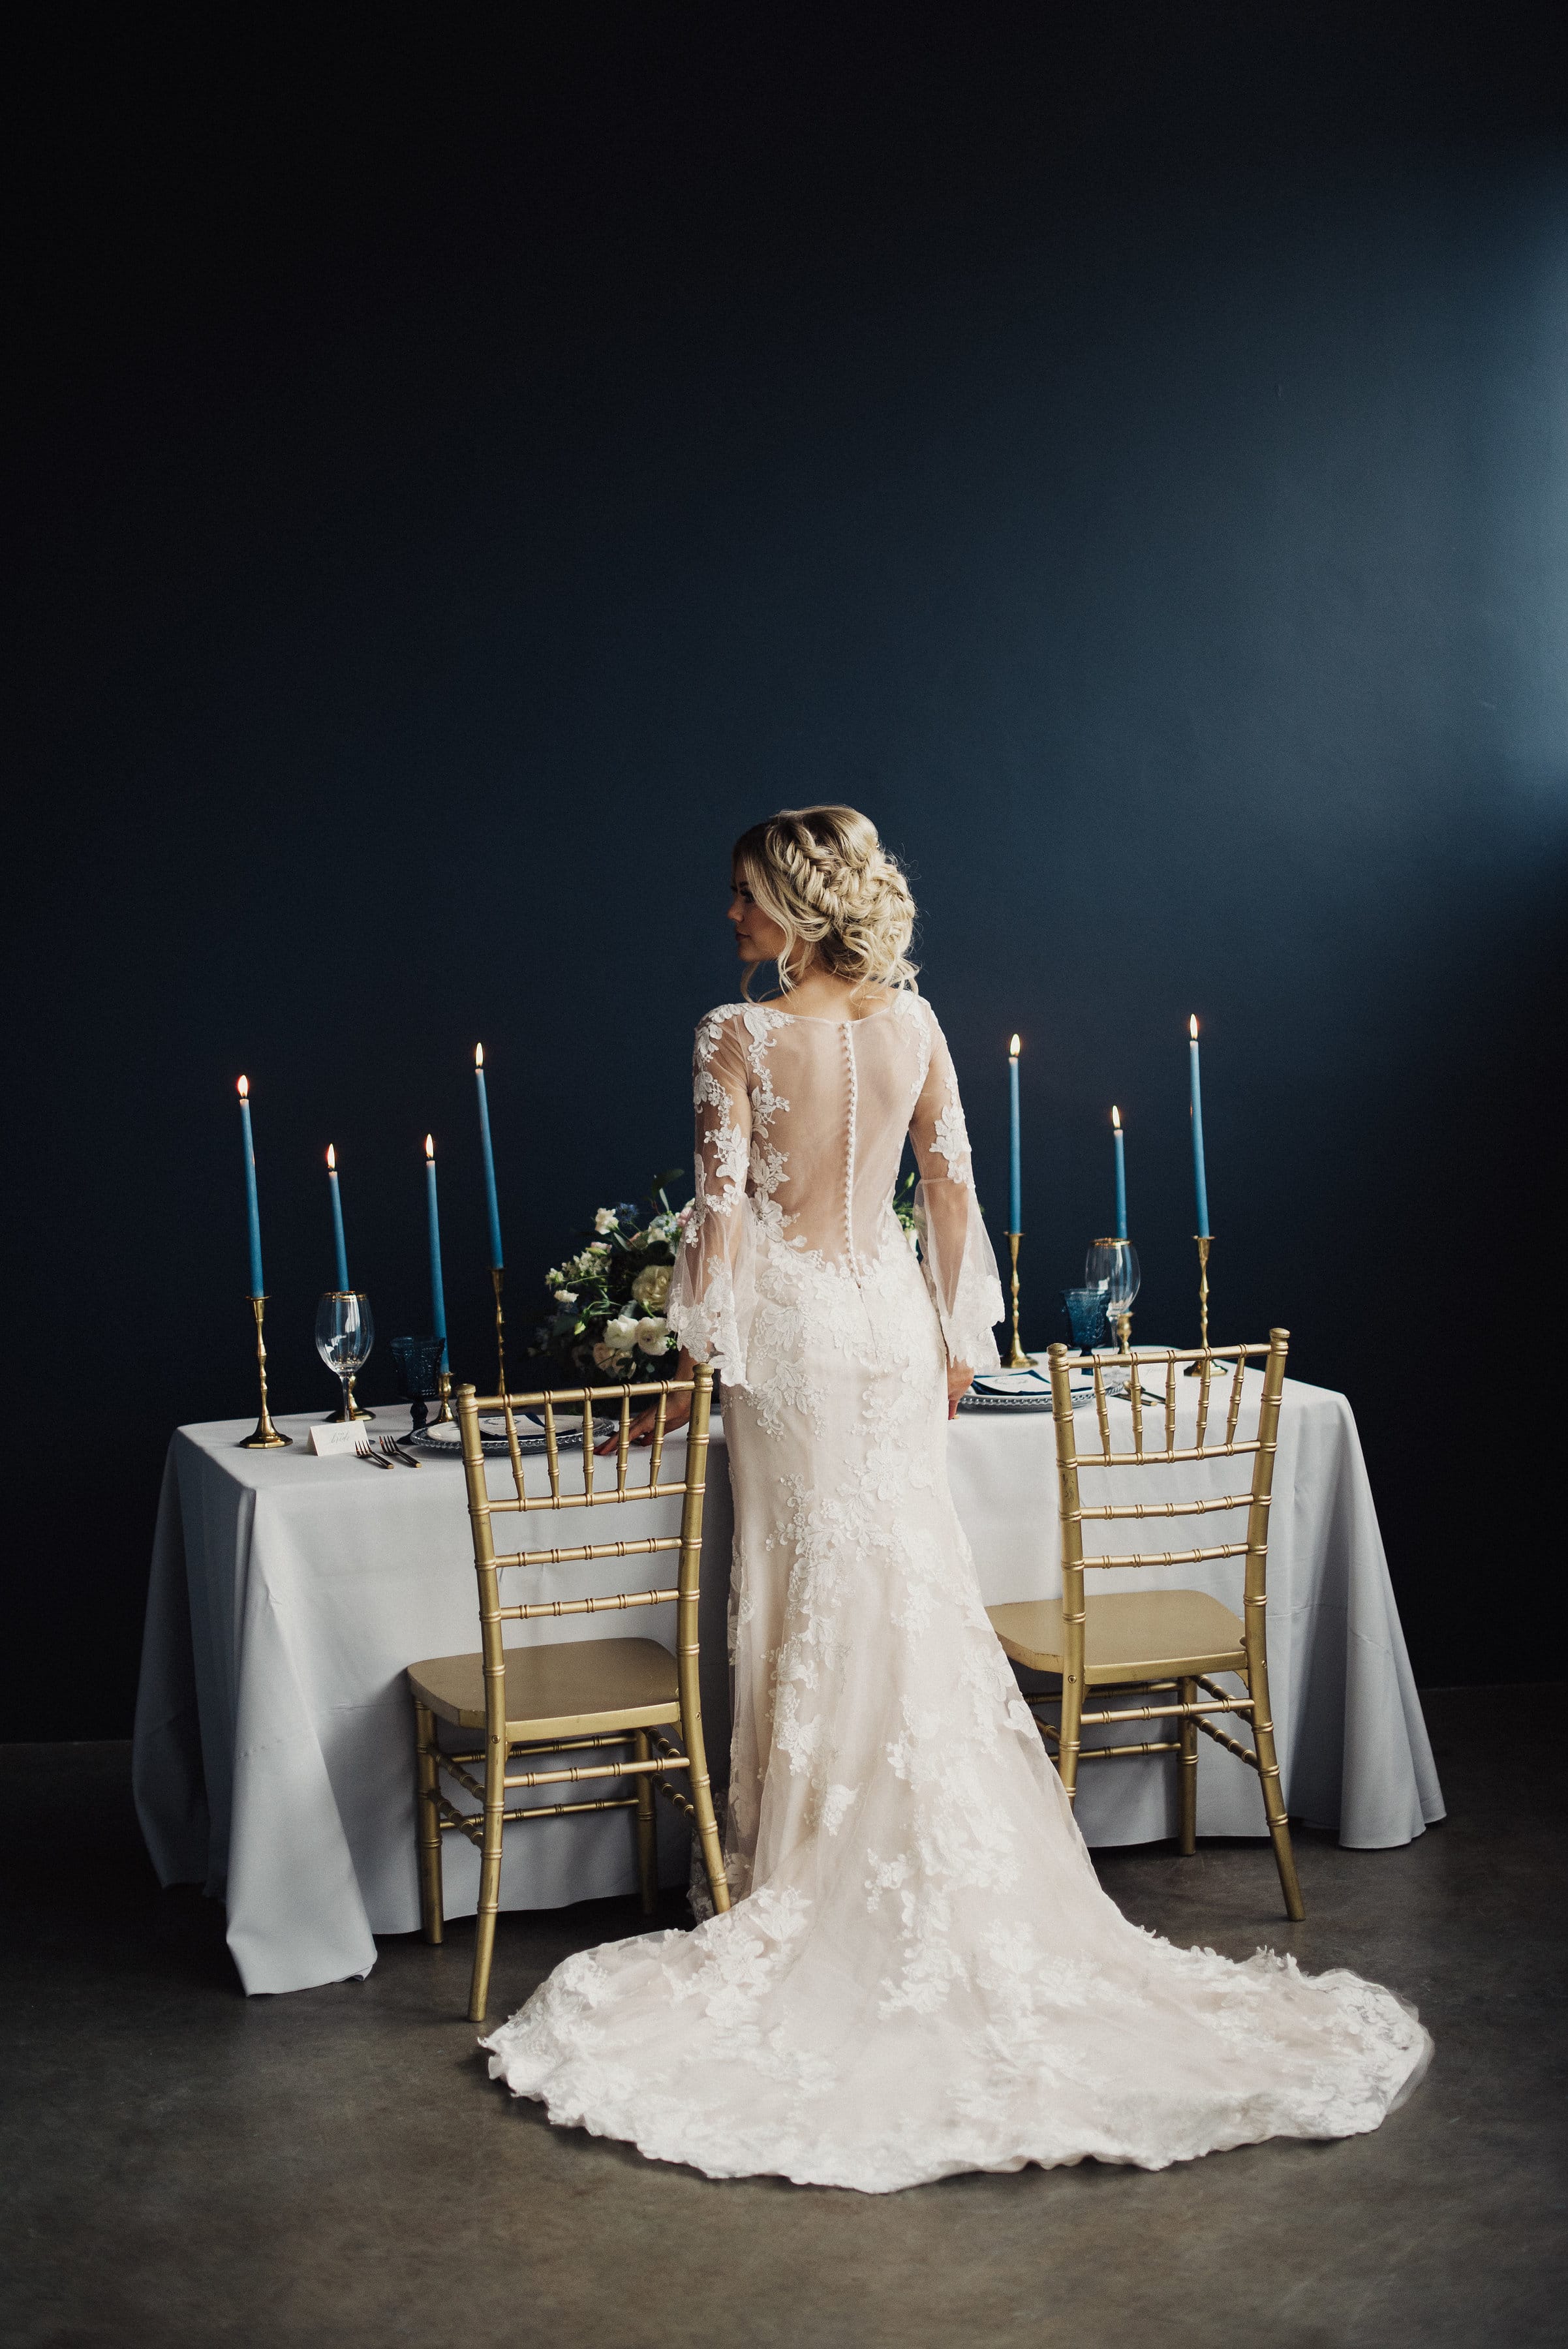 Something Blue Styled Shoot with 3 Vintage-inspired Wedding Dresses - Gabriella(discontinued) by Sottero & Midgley.